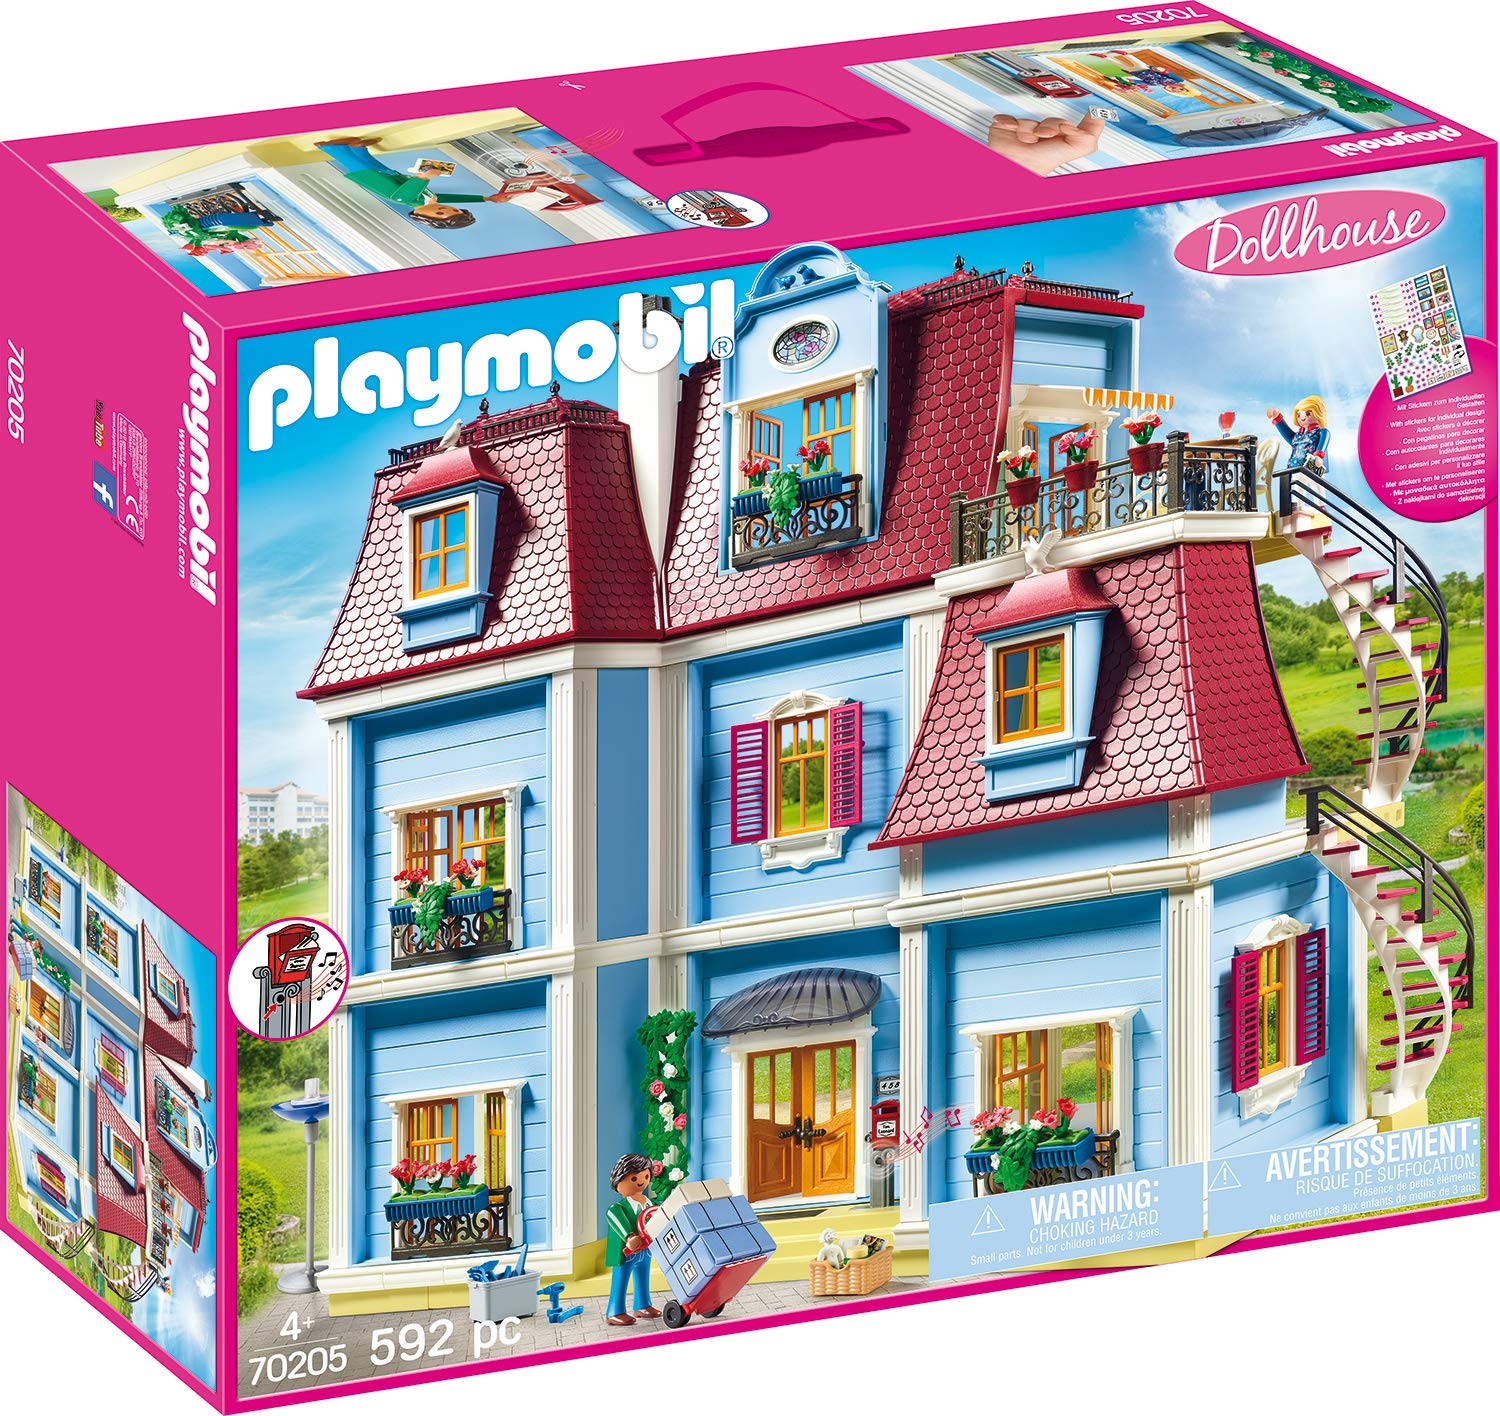 Playmobile 70205 Dollhouse Toy, Role Play, Multi-Coloured, One Size